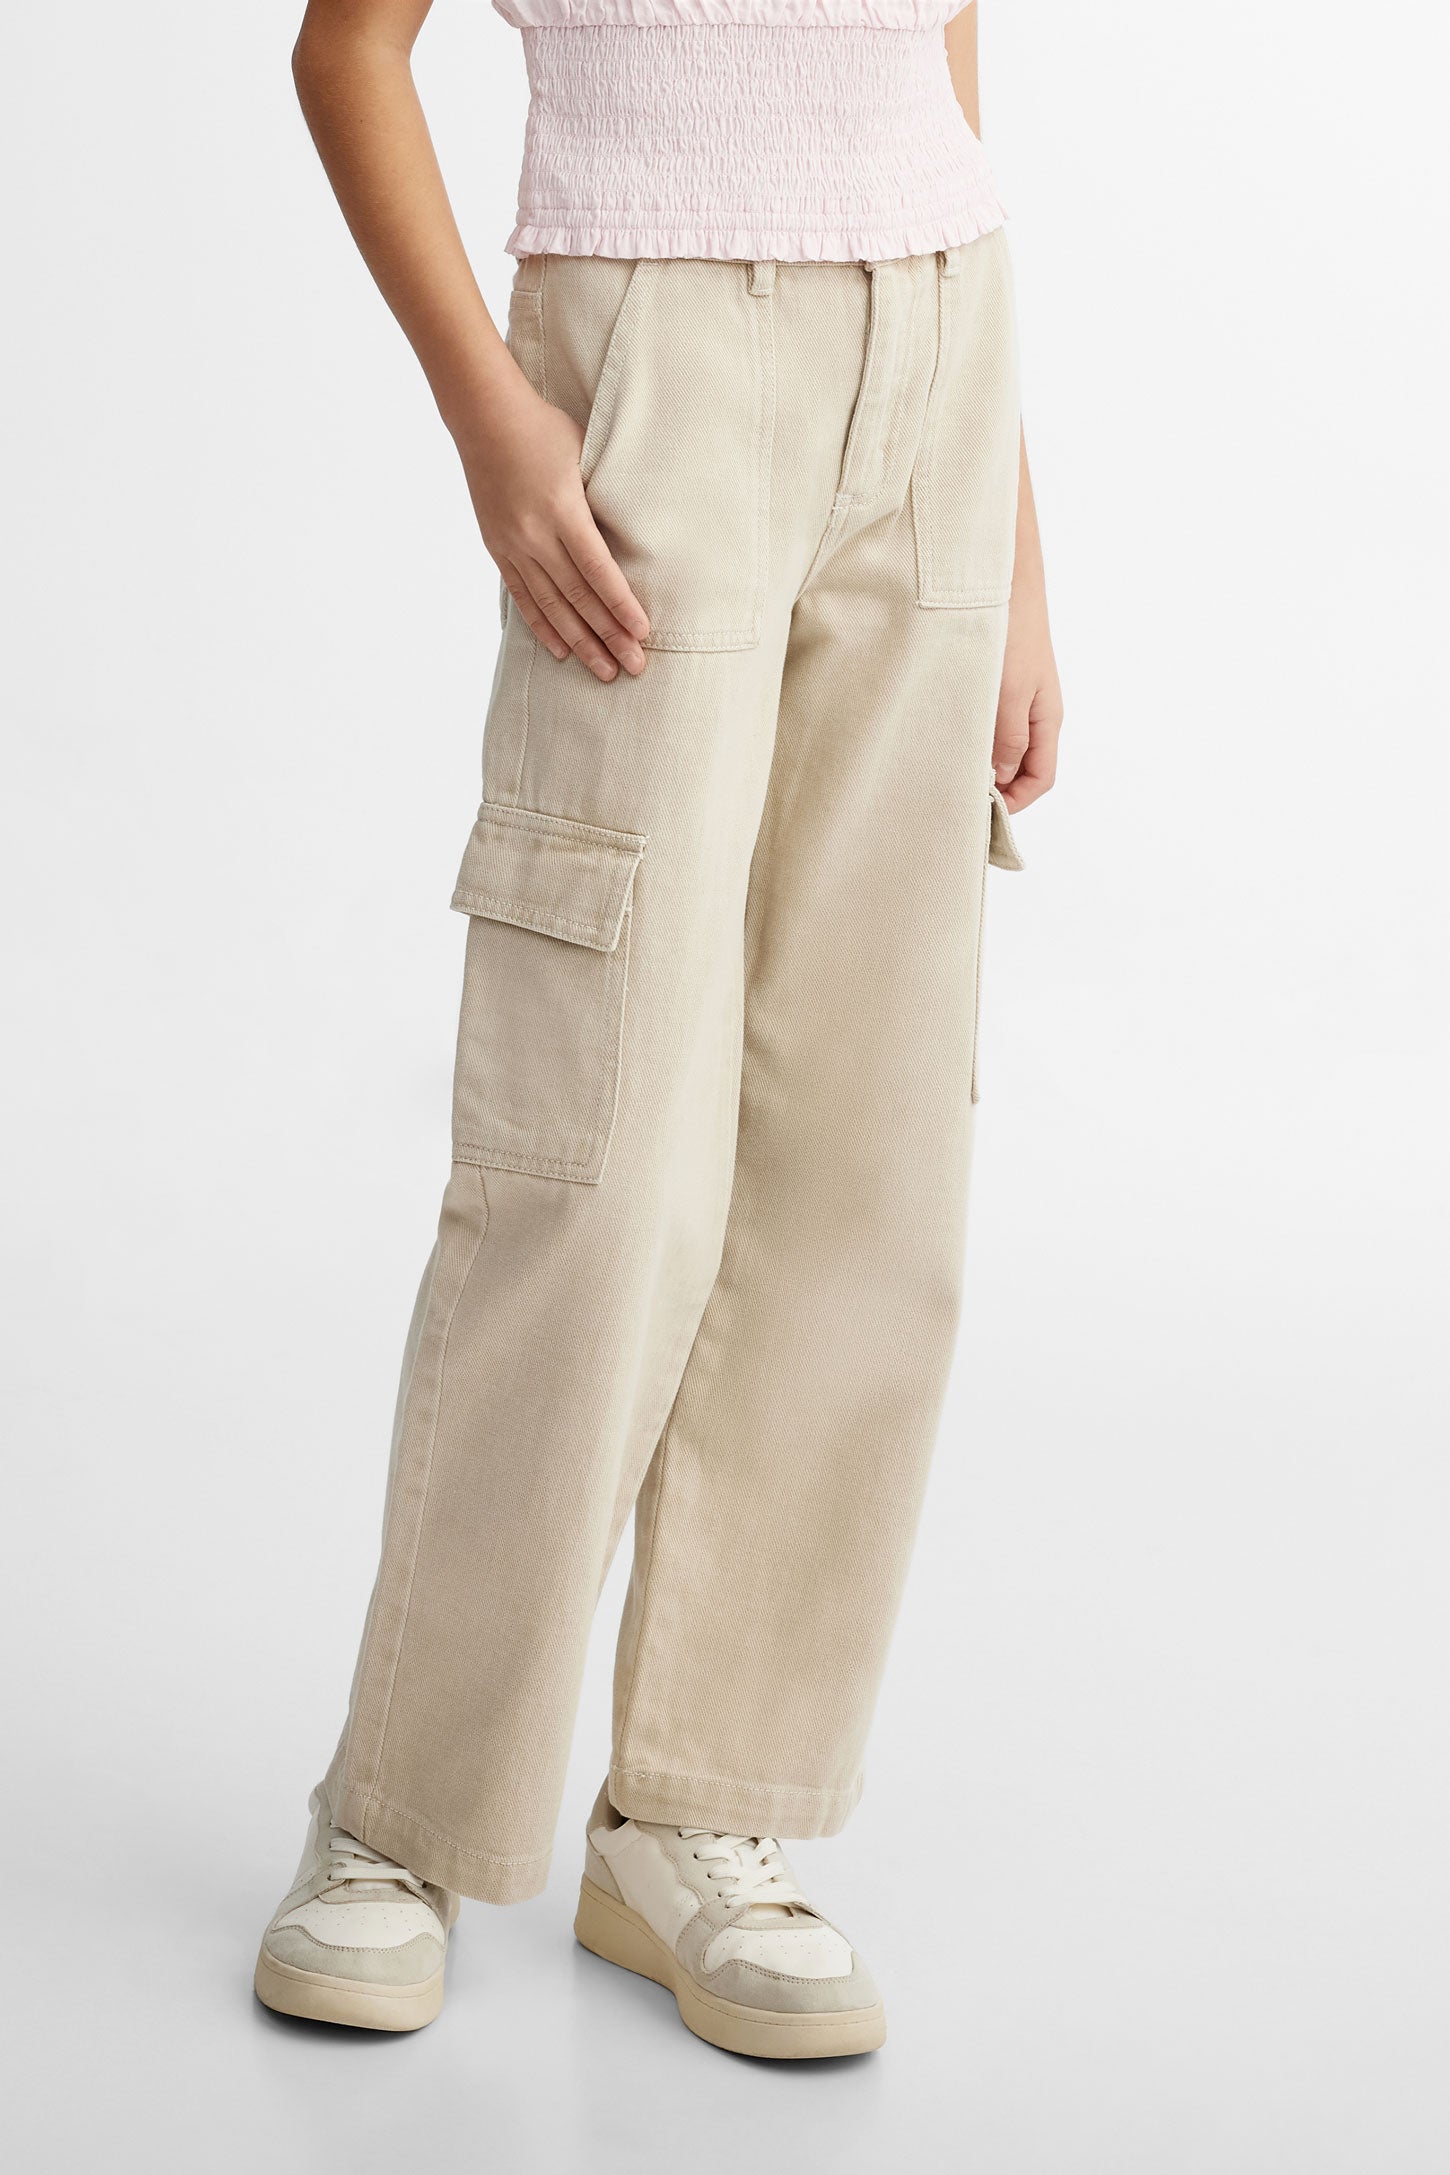 Jeans cargo jambe large - Ado fille && BEIGE